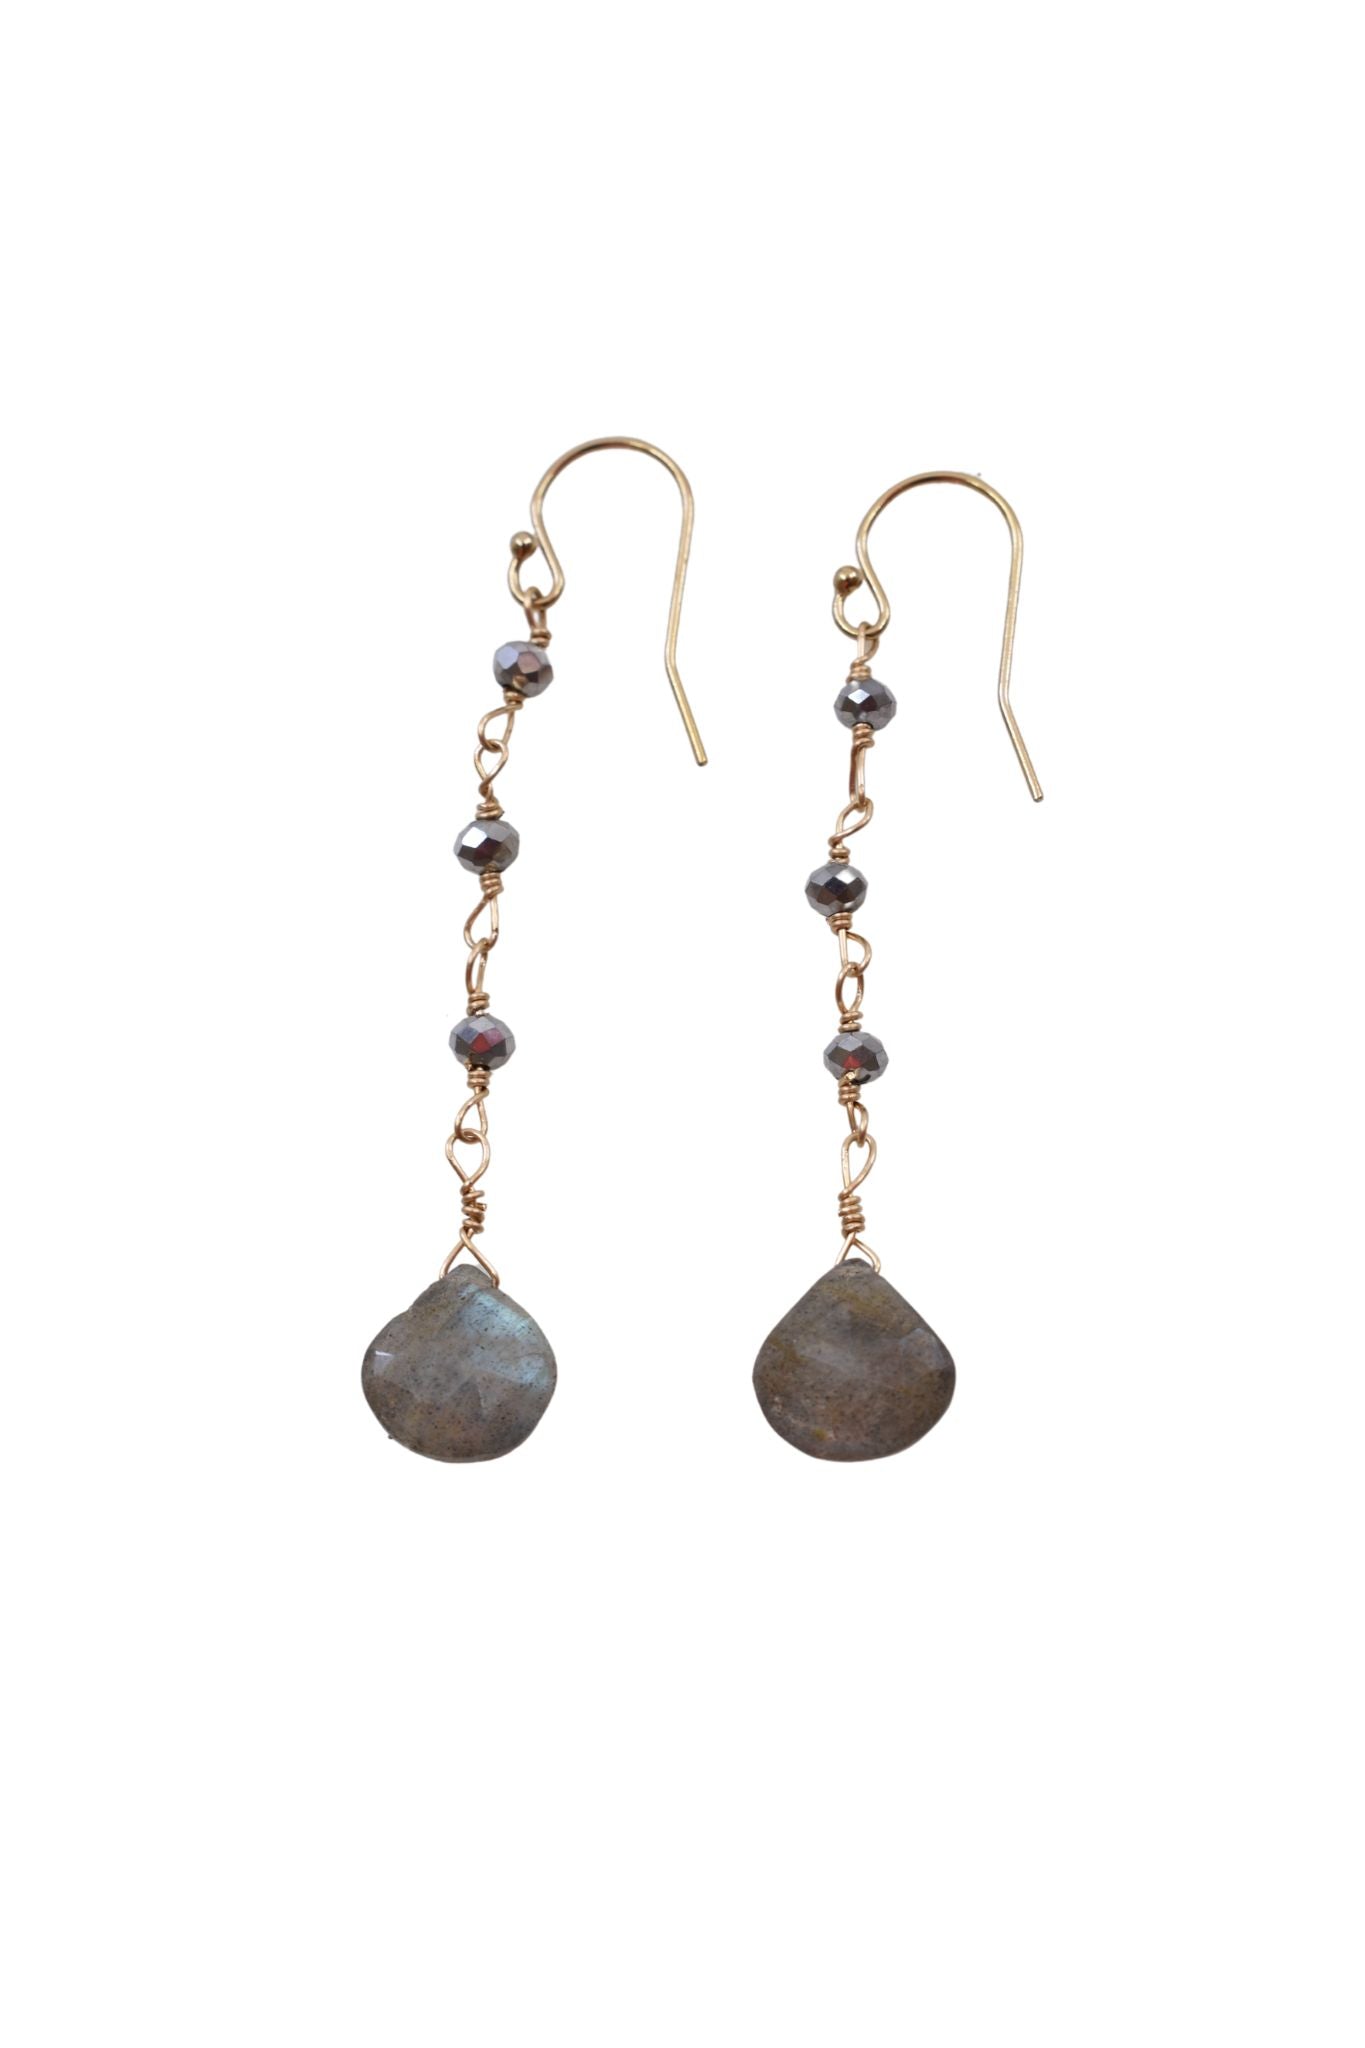 Emmah Earrings in Polished Pyrite and Labradorite